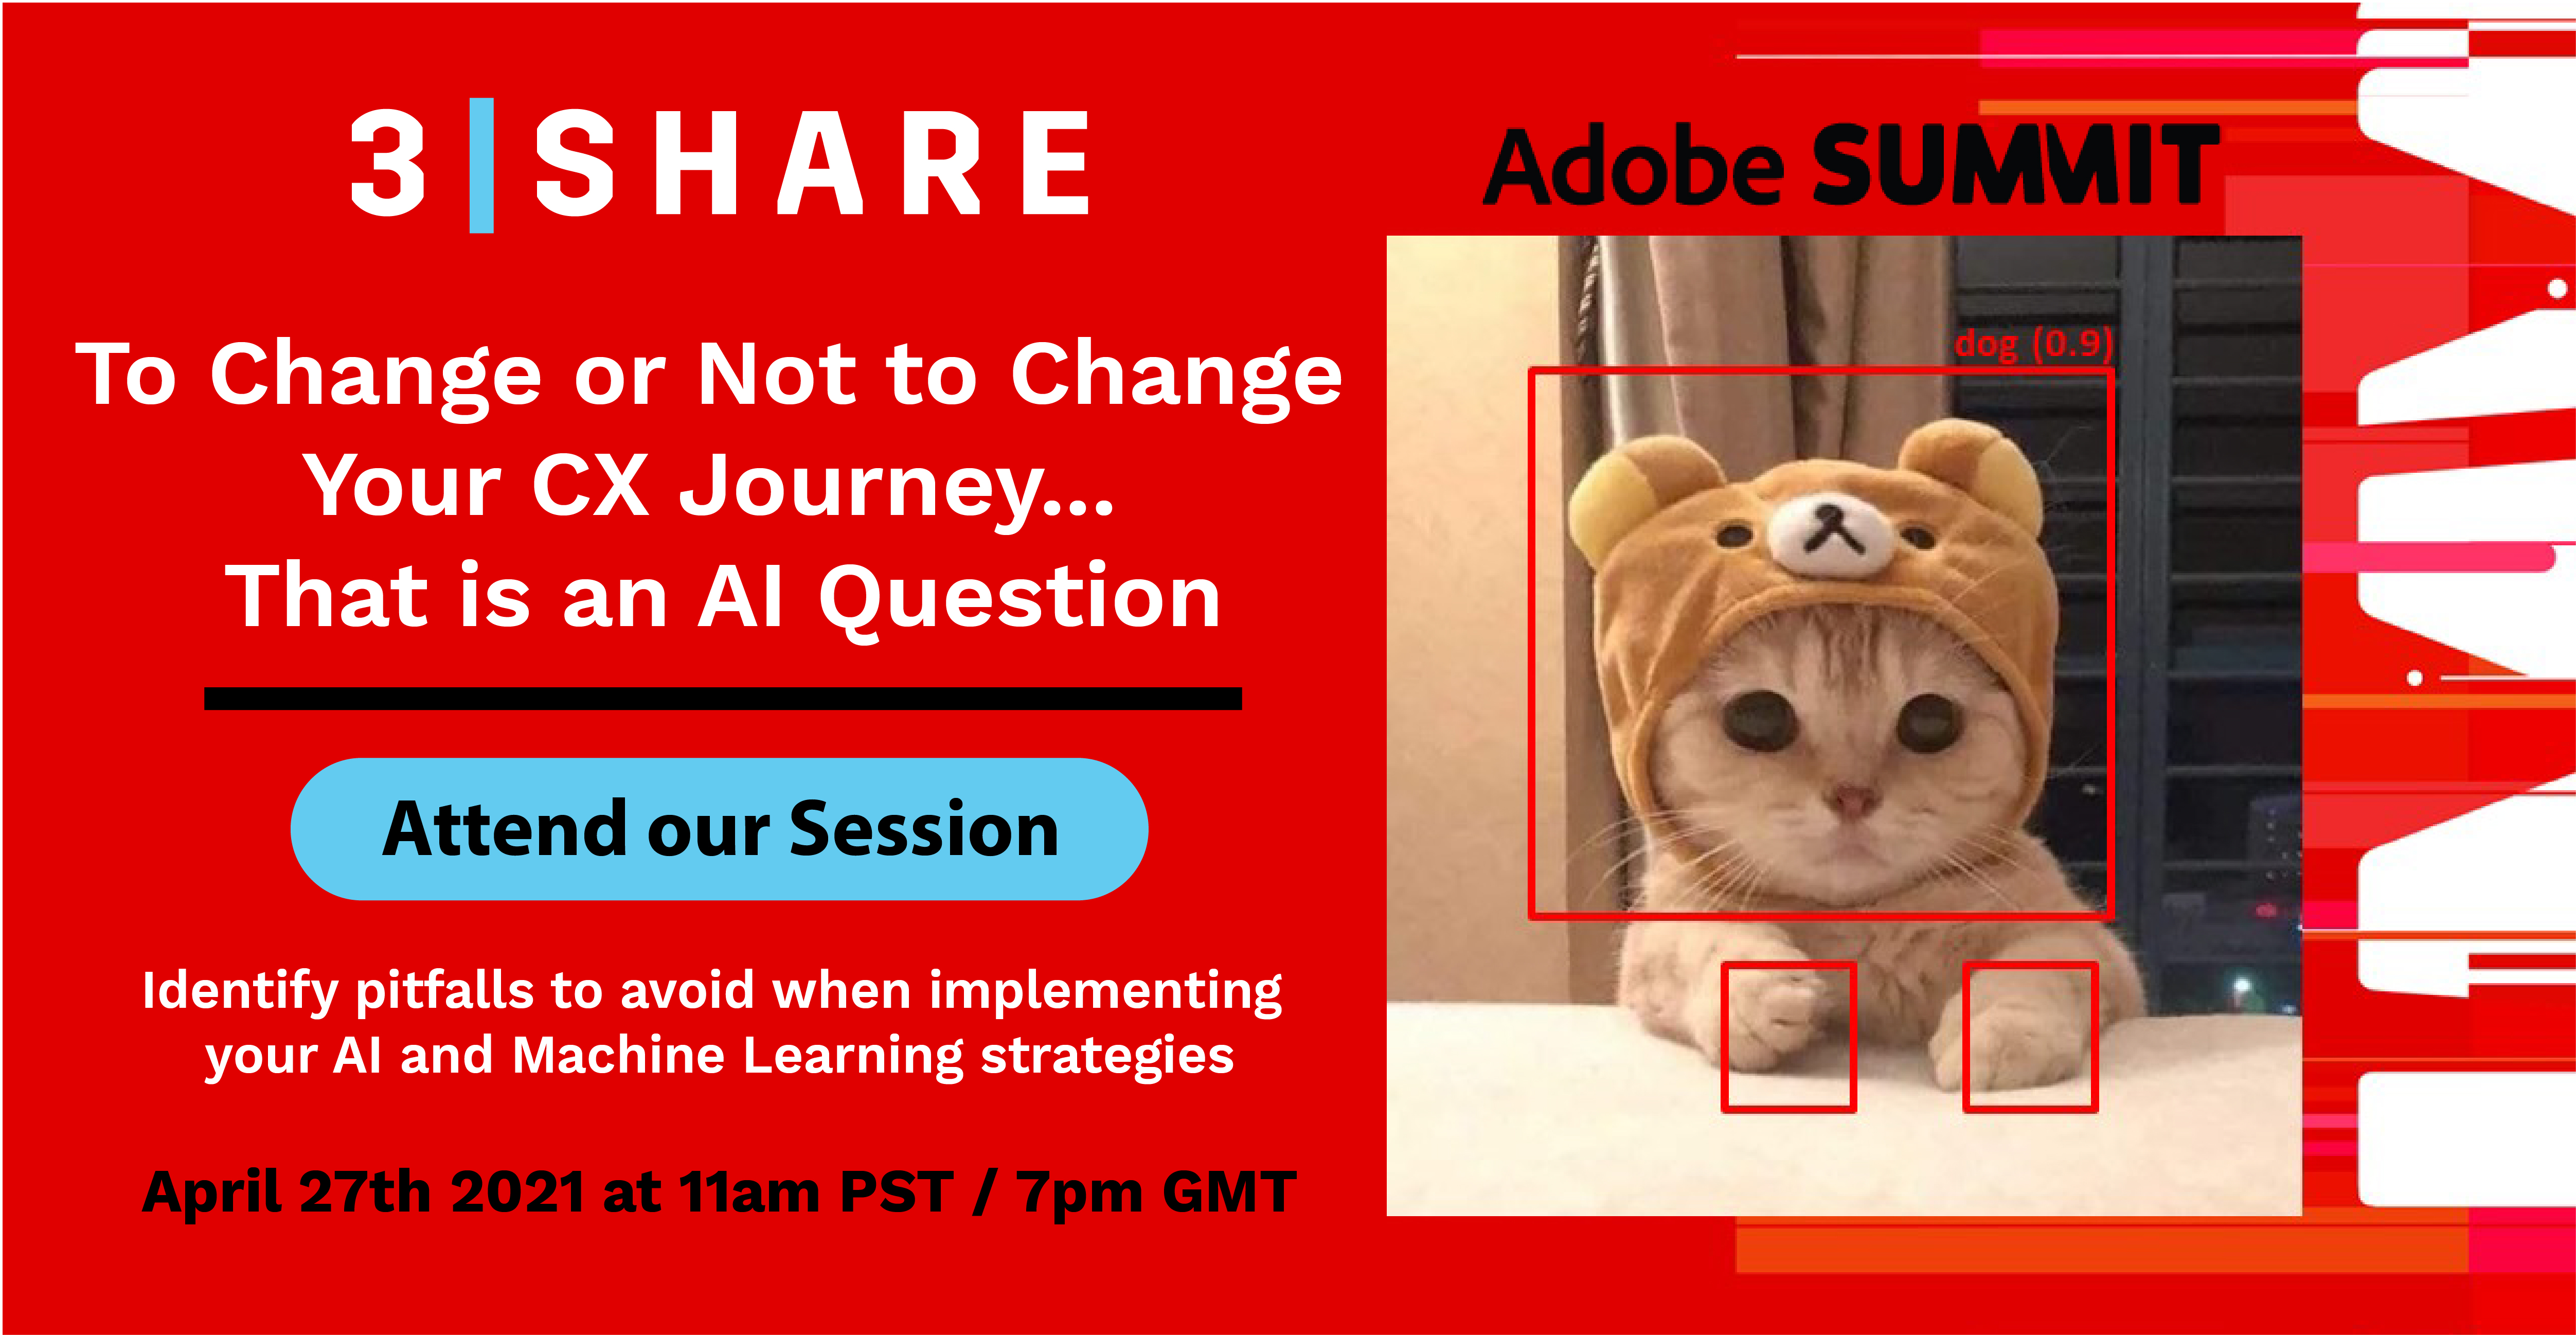 3SHARE: Join us at #AdobeSummit for our FREE virtual session on AI and CX: https://t.co/HMjDlsieQs nnTim Donovan of #3SHARE… https://t.co/0kEolbs9pI